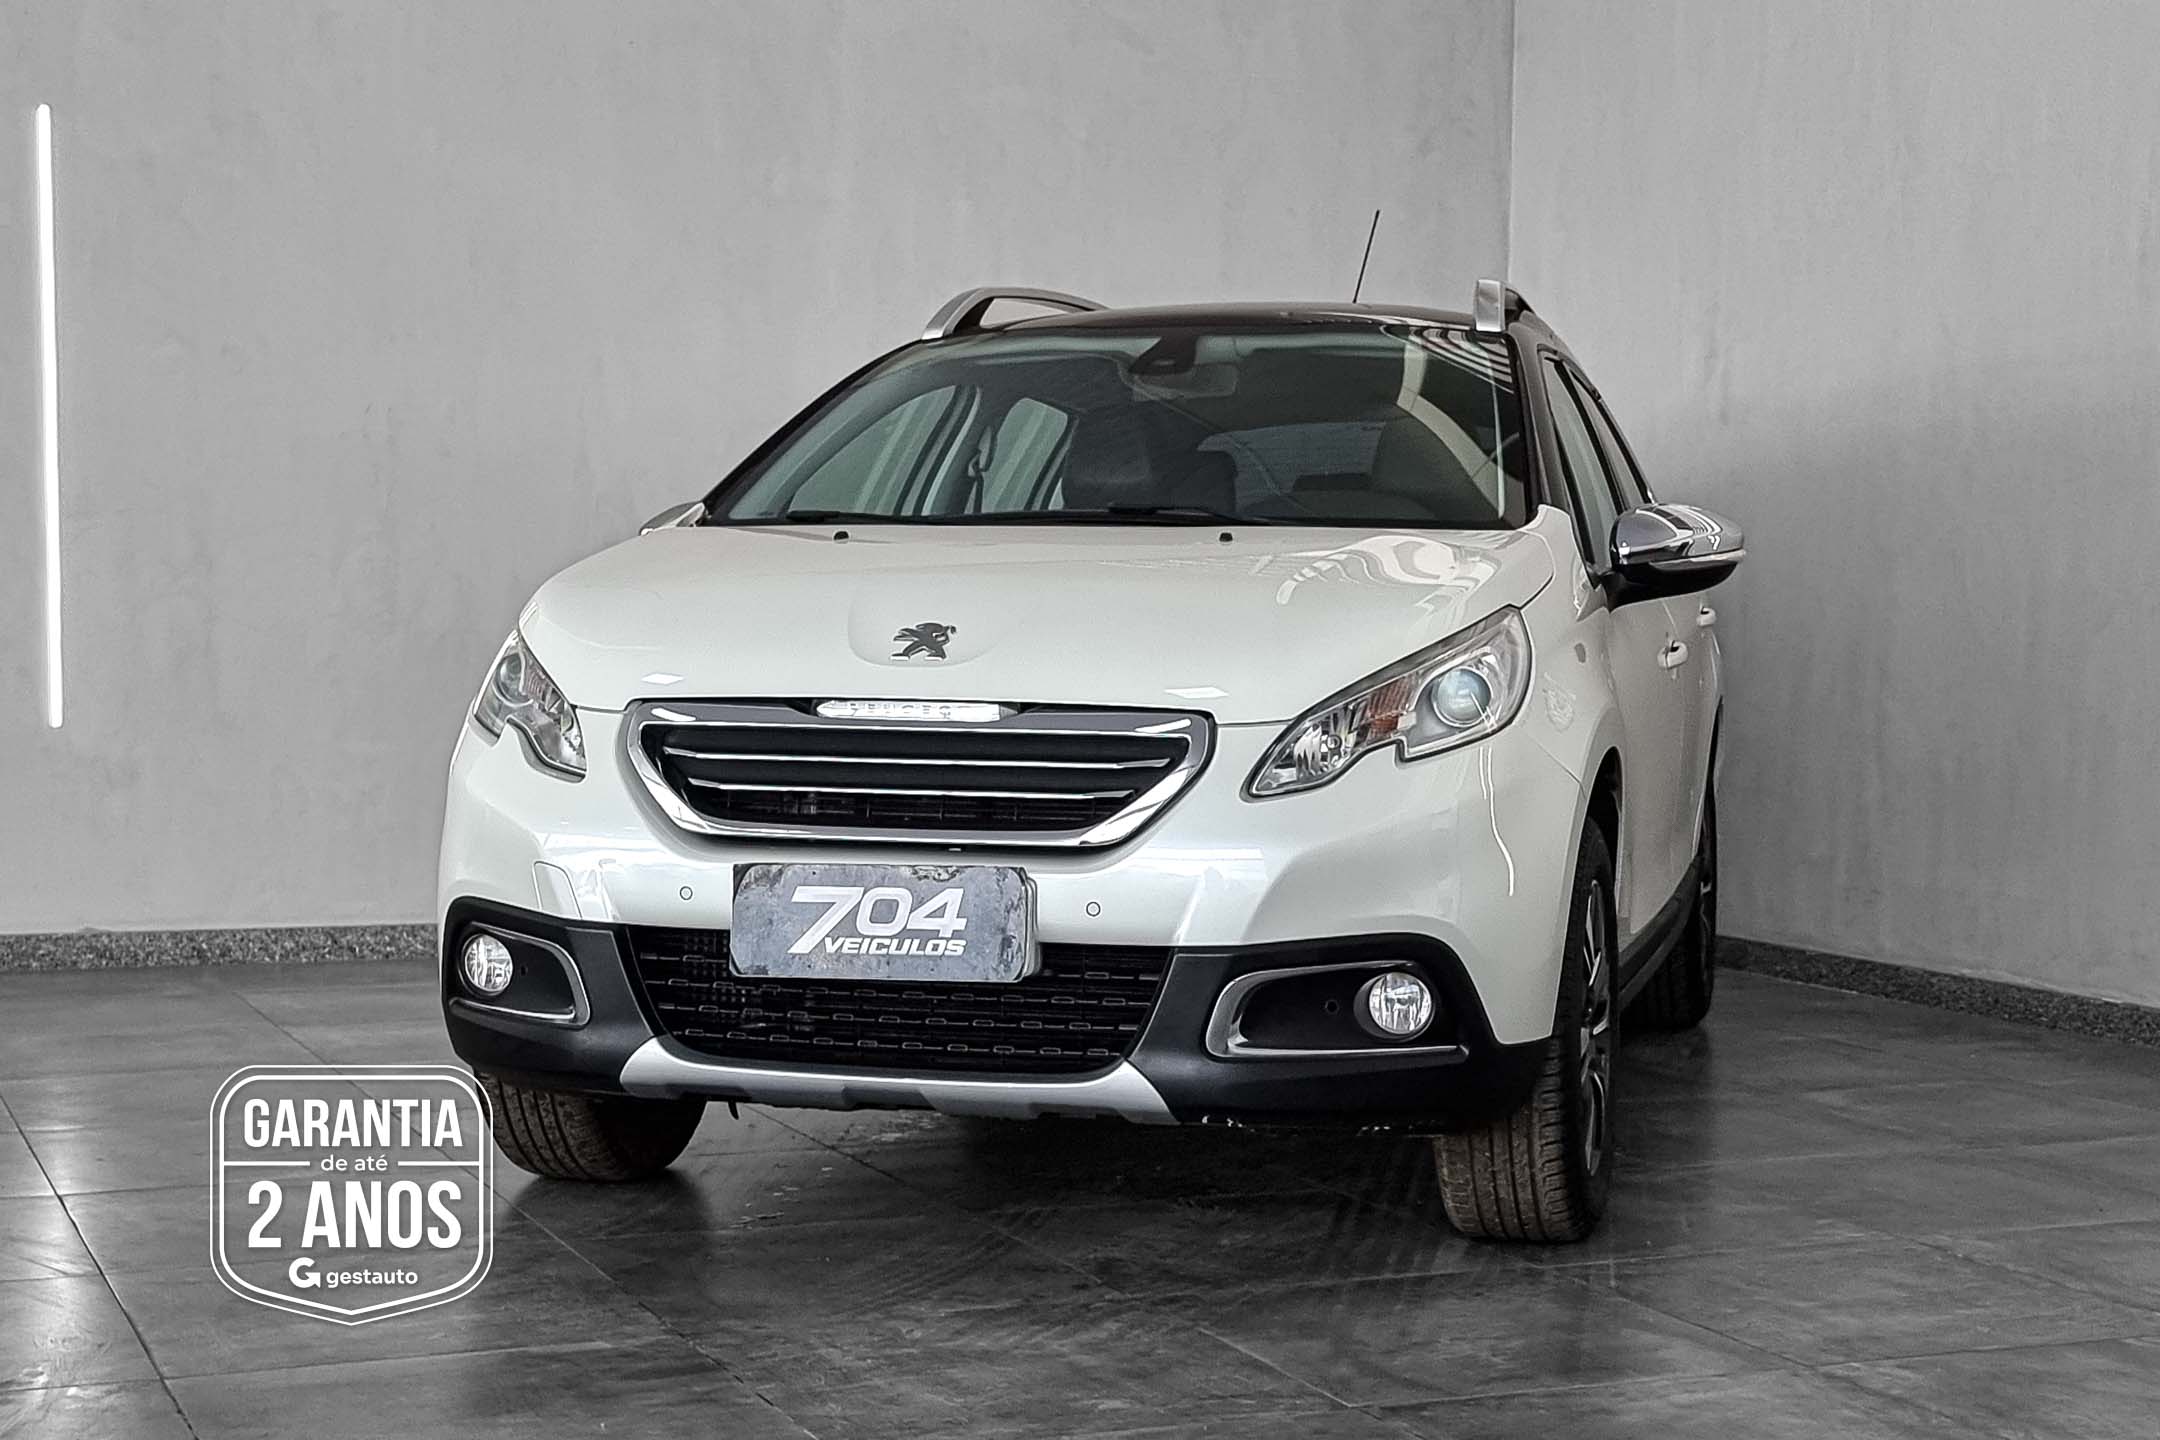 PEUGEOT-2008 GRIFFE THP